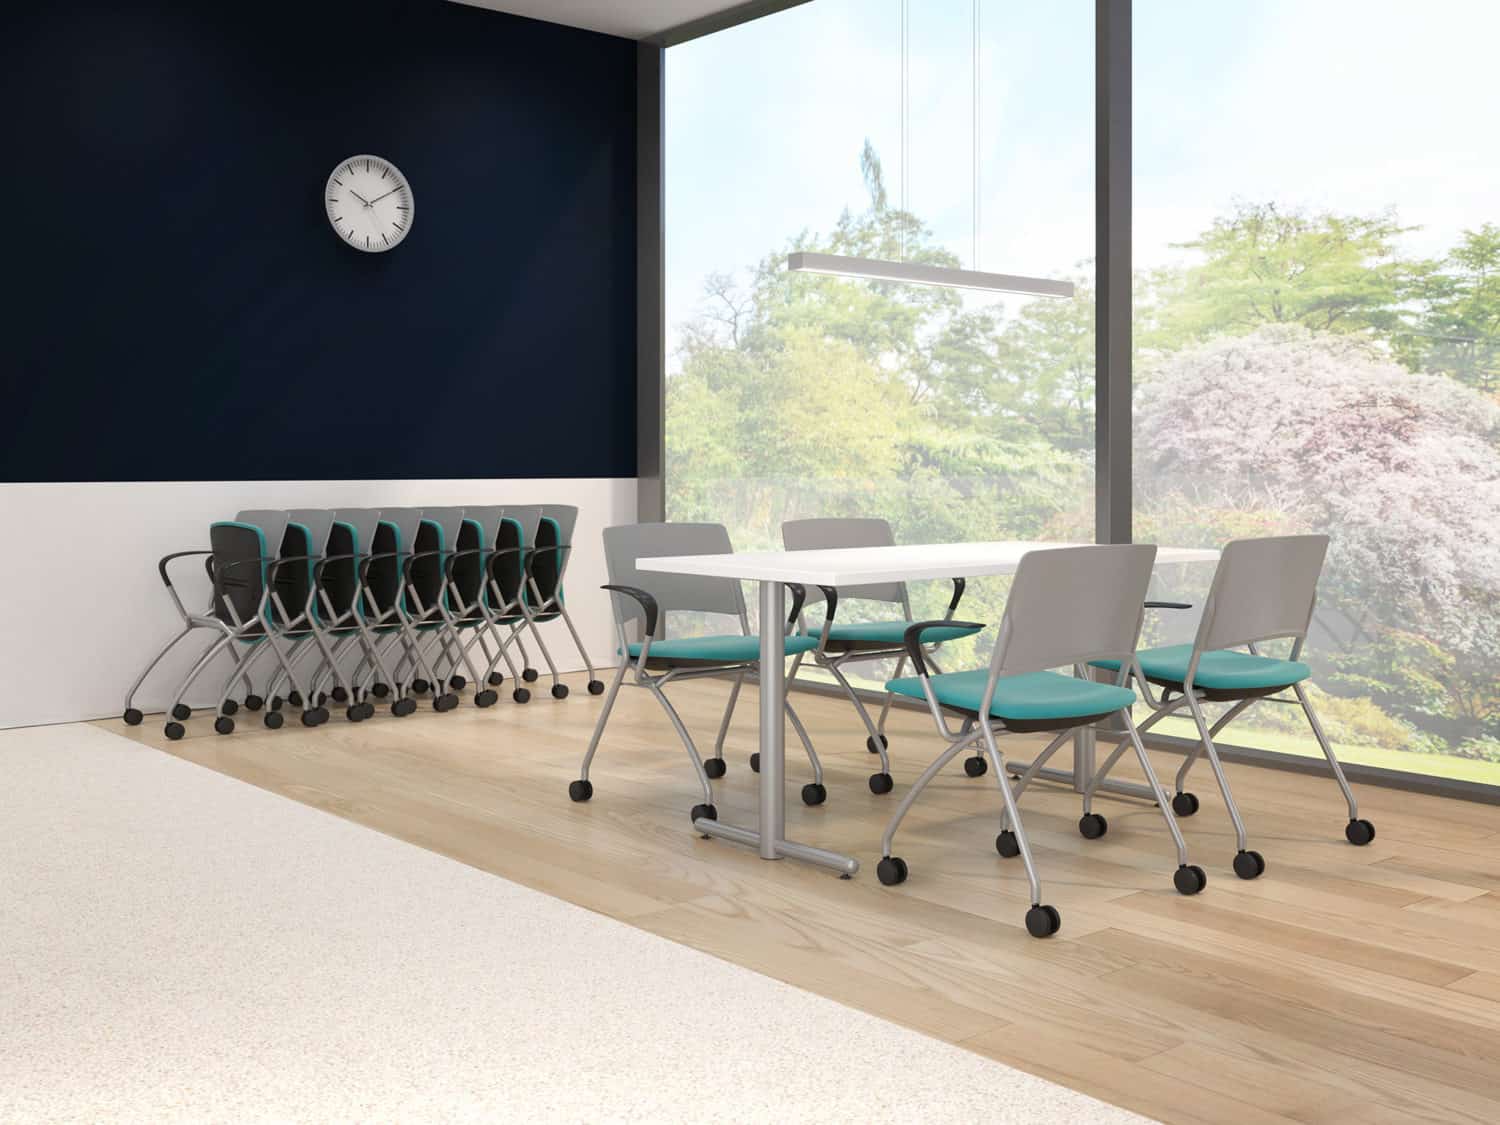 Delta Chairs with Casters shown with Tubular Table, Delta Nesting Chairs shown in study area